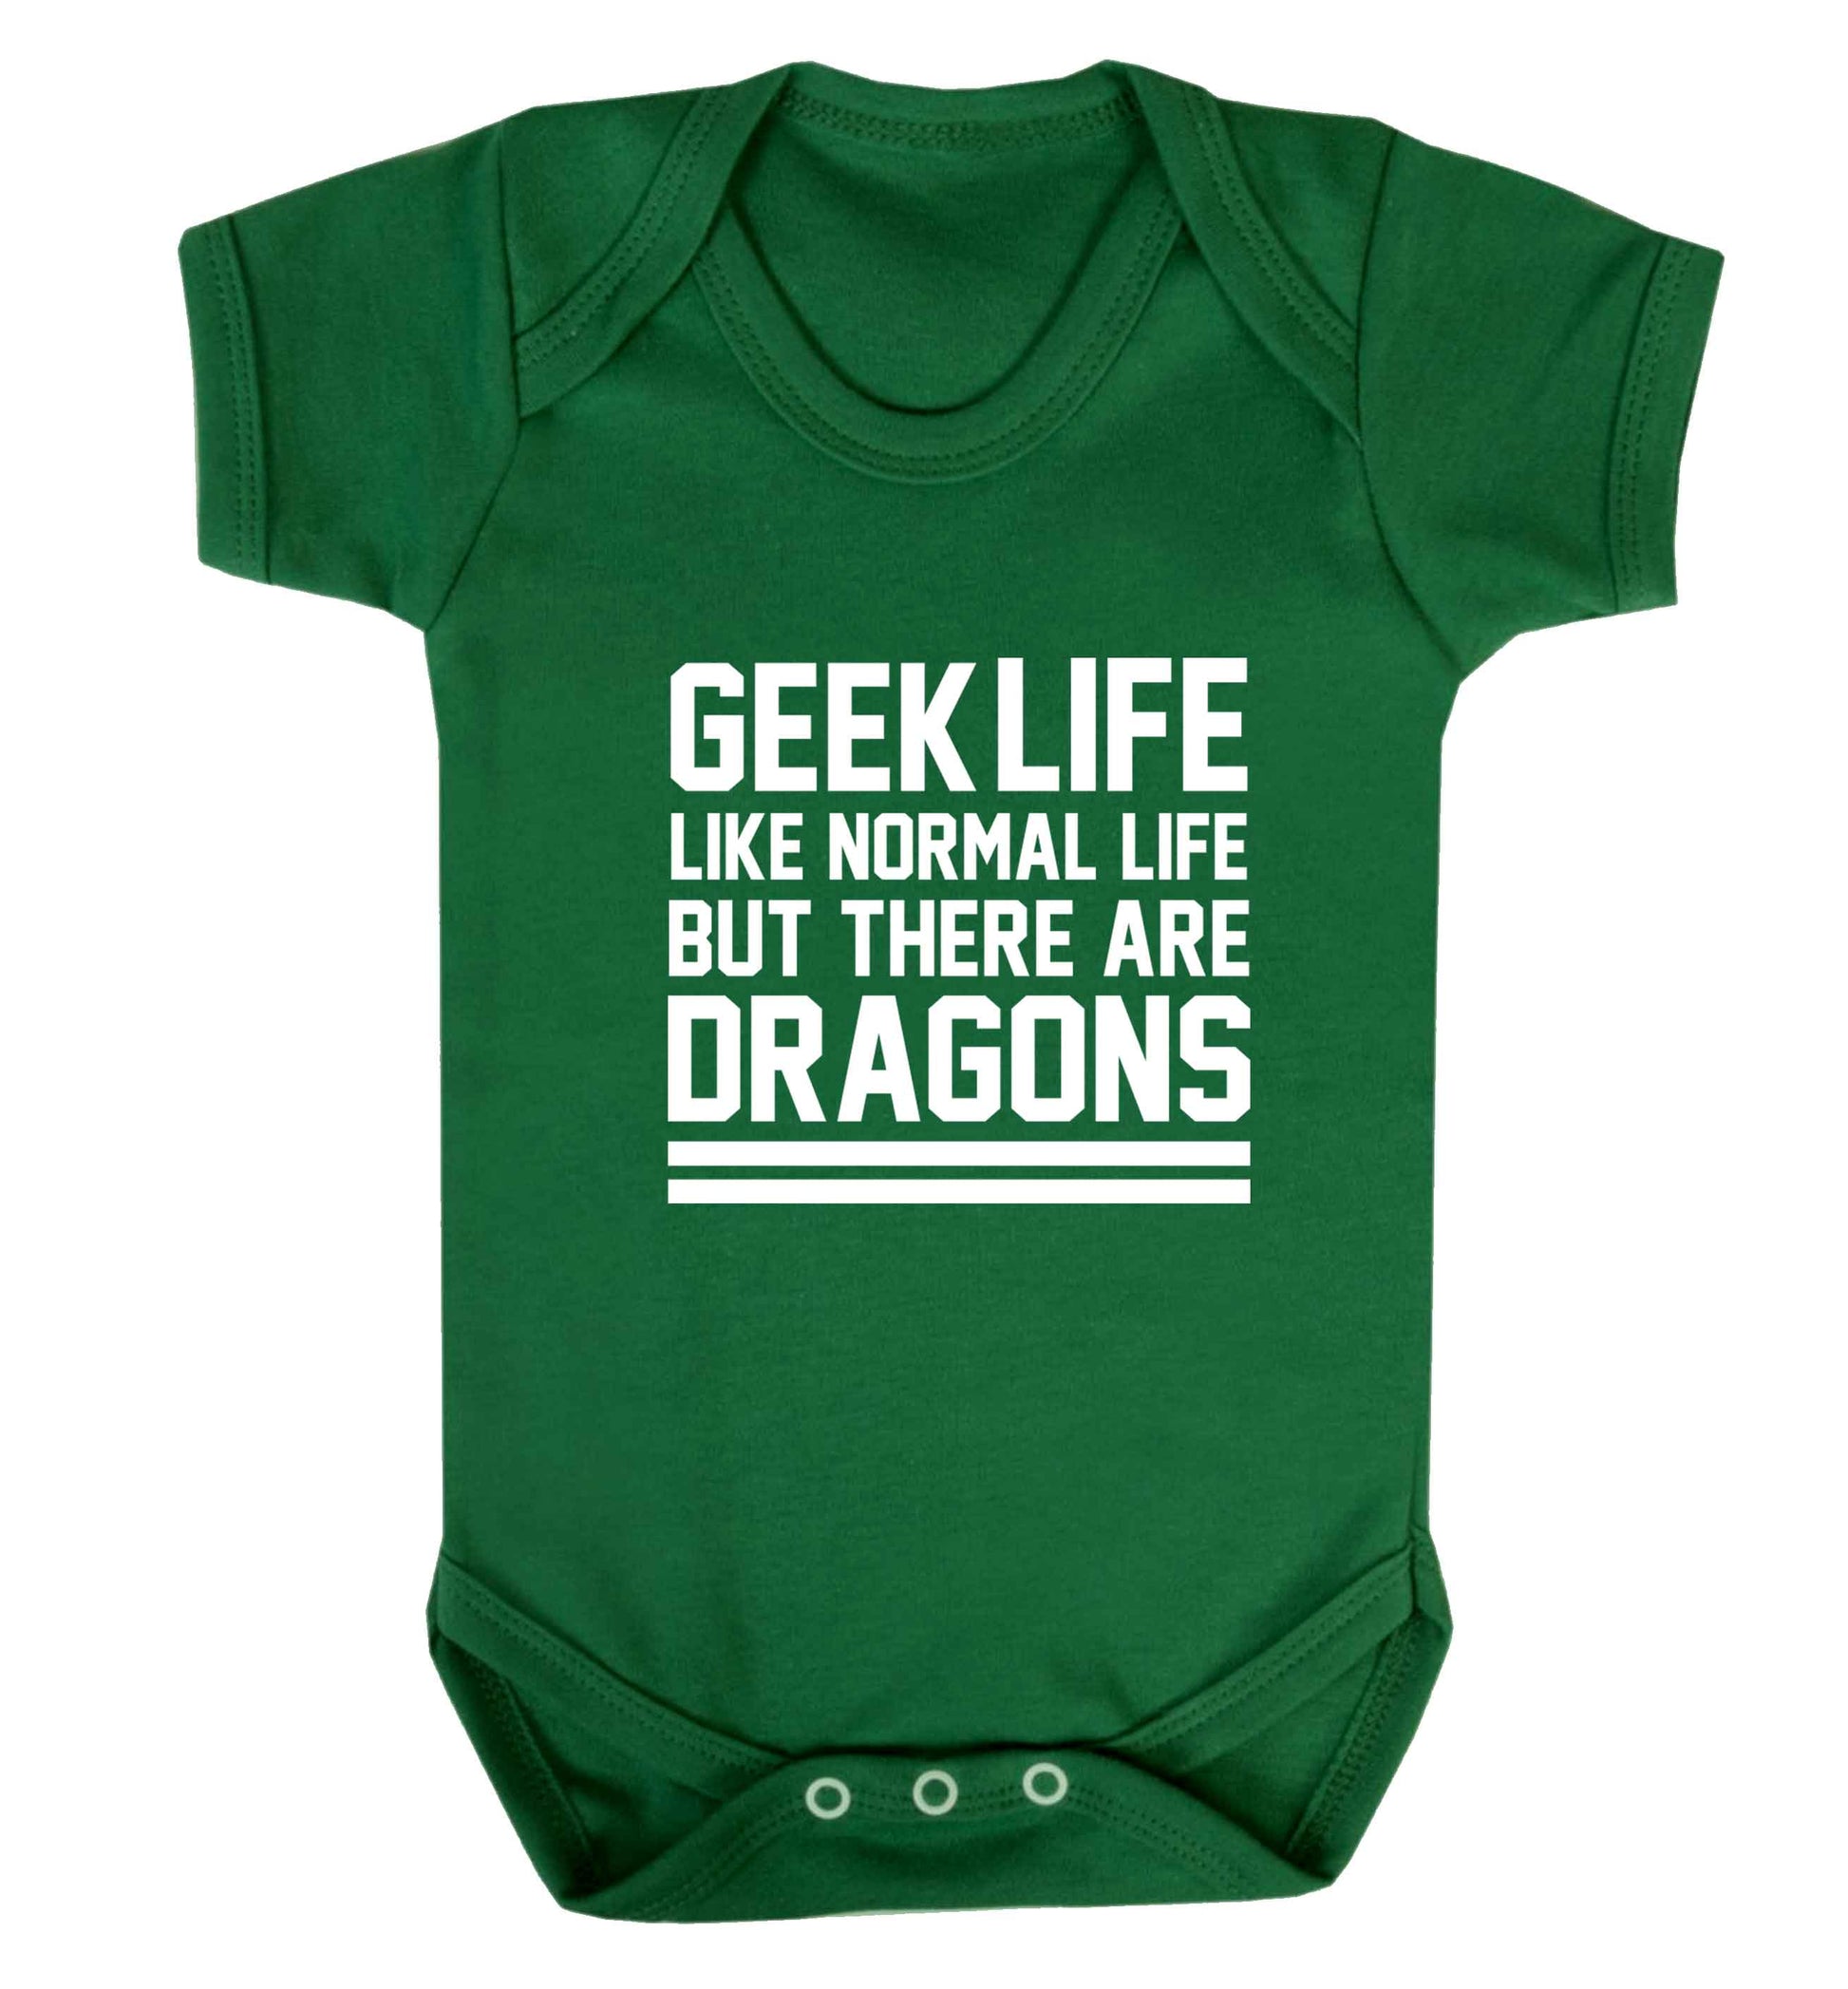 Geek life like normal life but there are dragons baby vest green 18-24 months